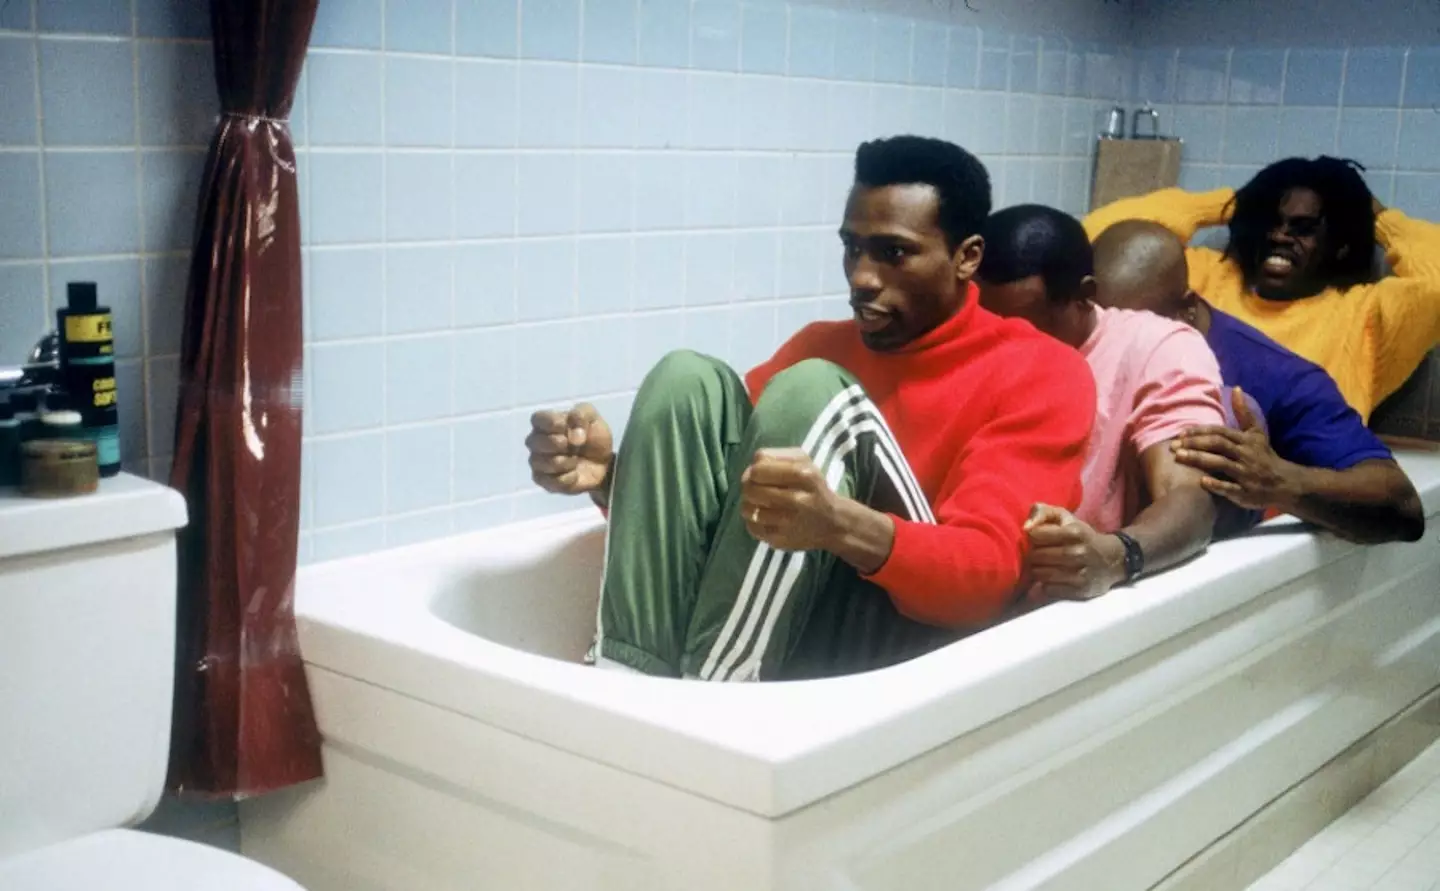 Cool Runnings is still an absolute classic.